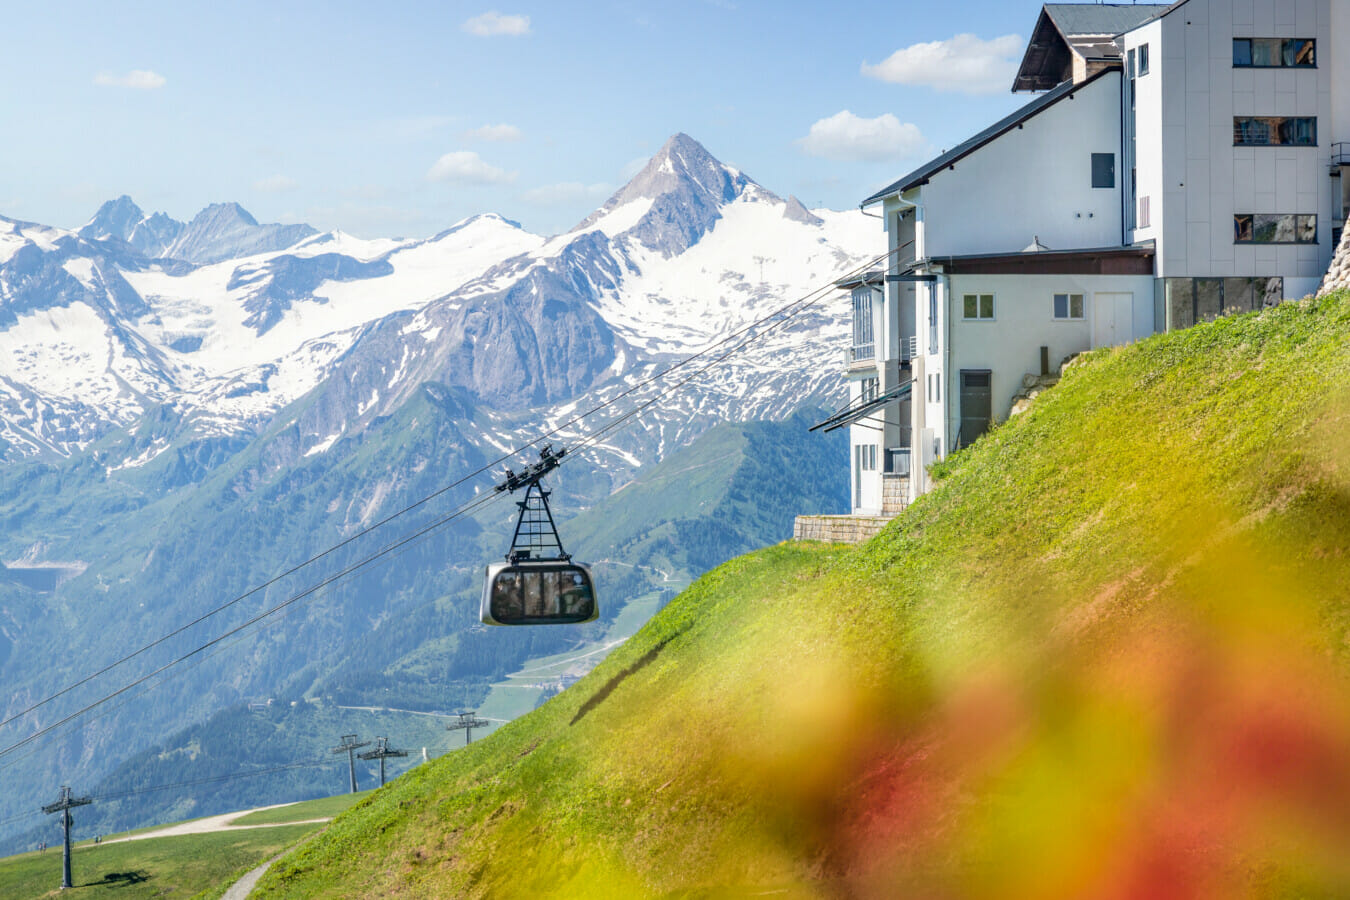 From Austria to Argentina – 4 Snow-Filled Destinations for Your Summertime Skiing Escape